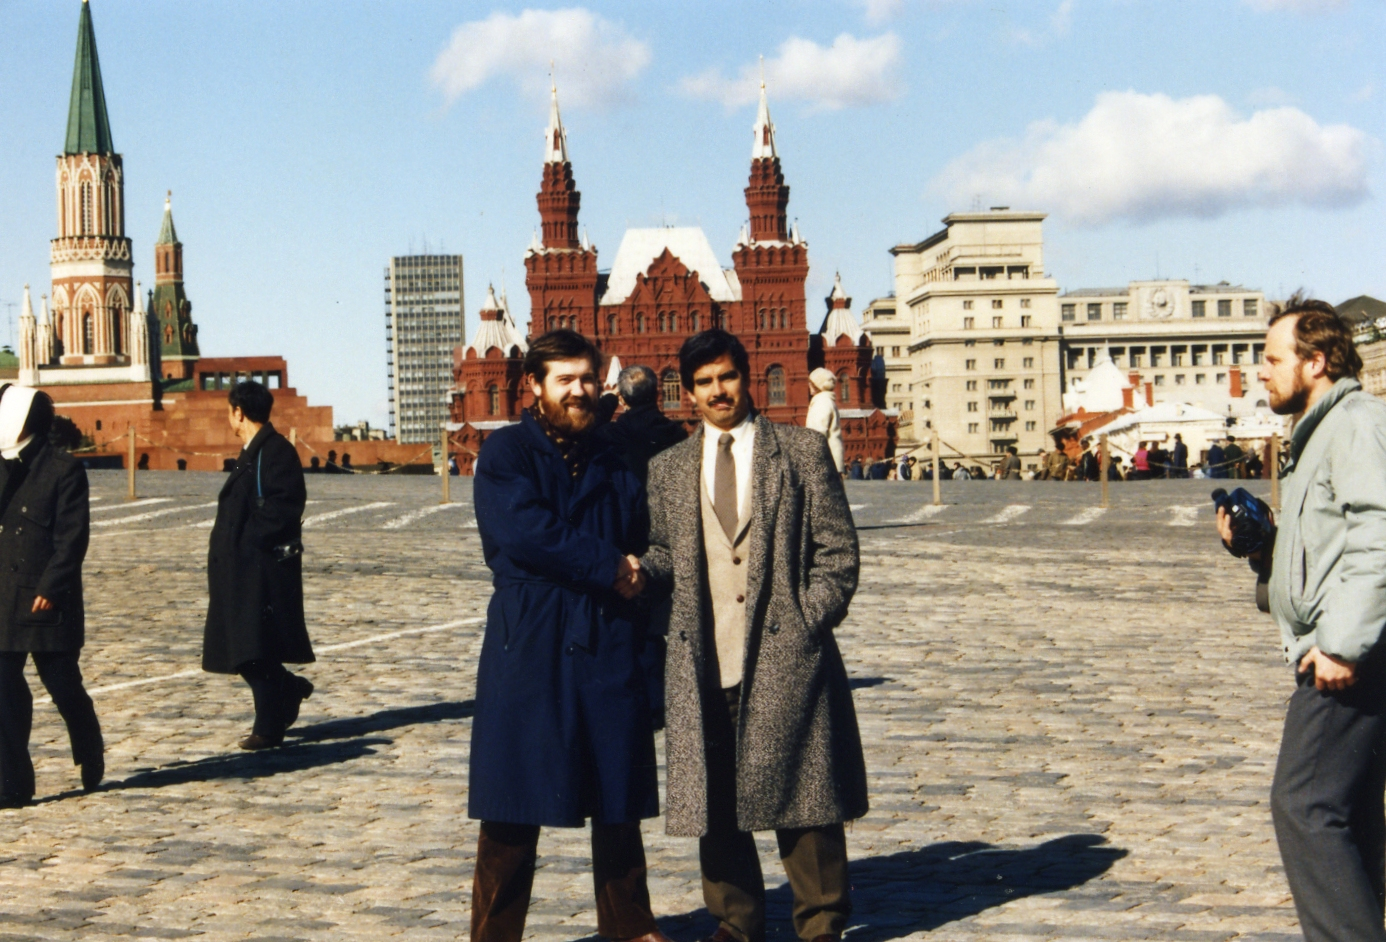 Alexey and Henk in front of the Kremlin.